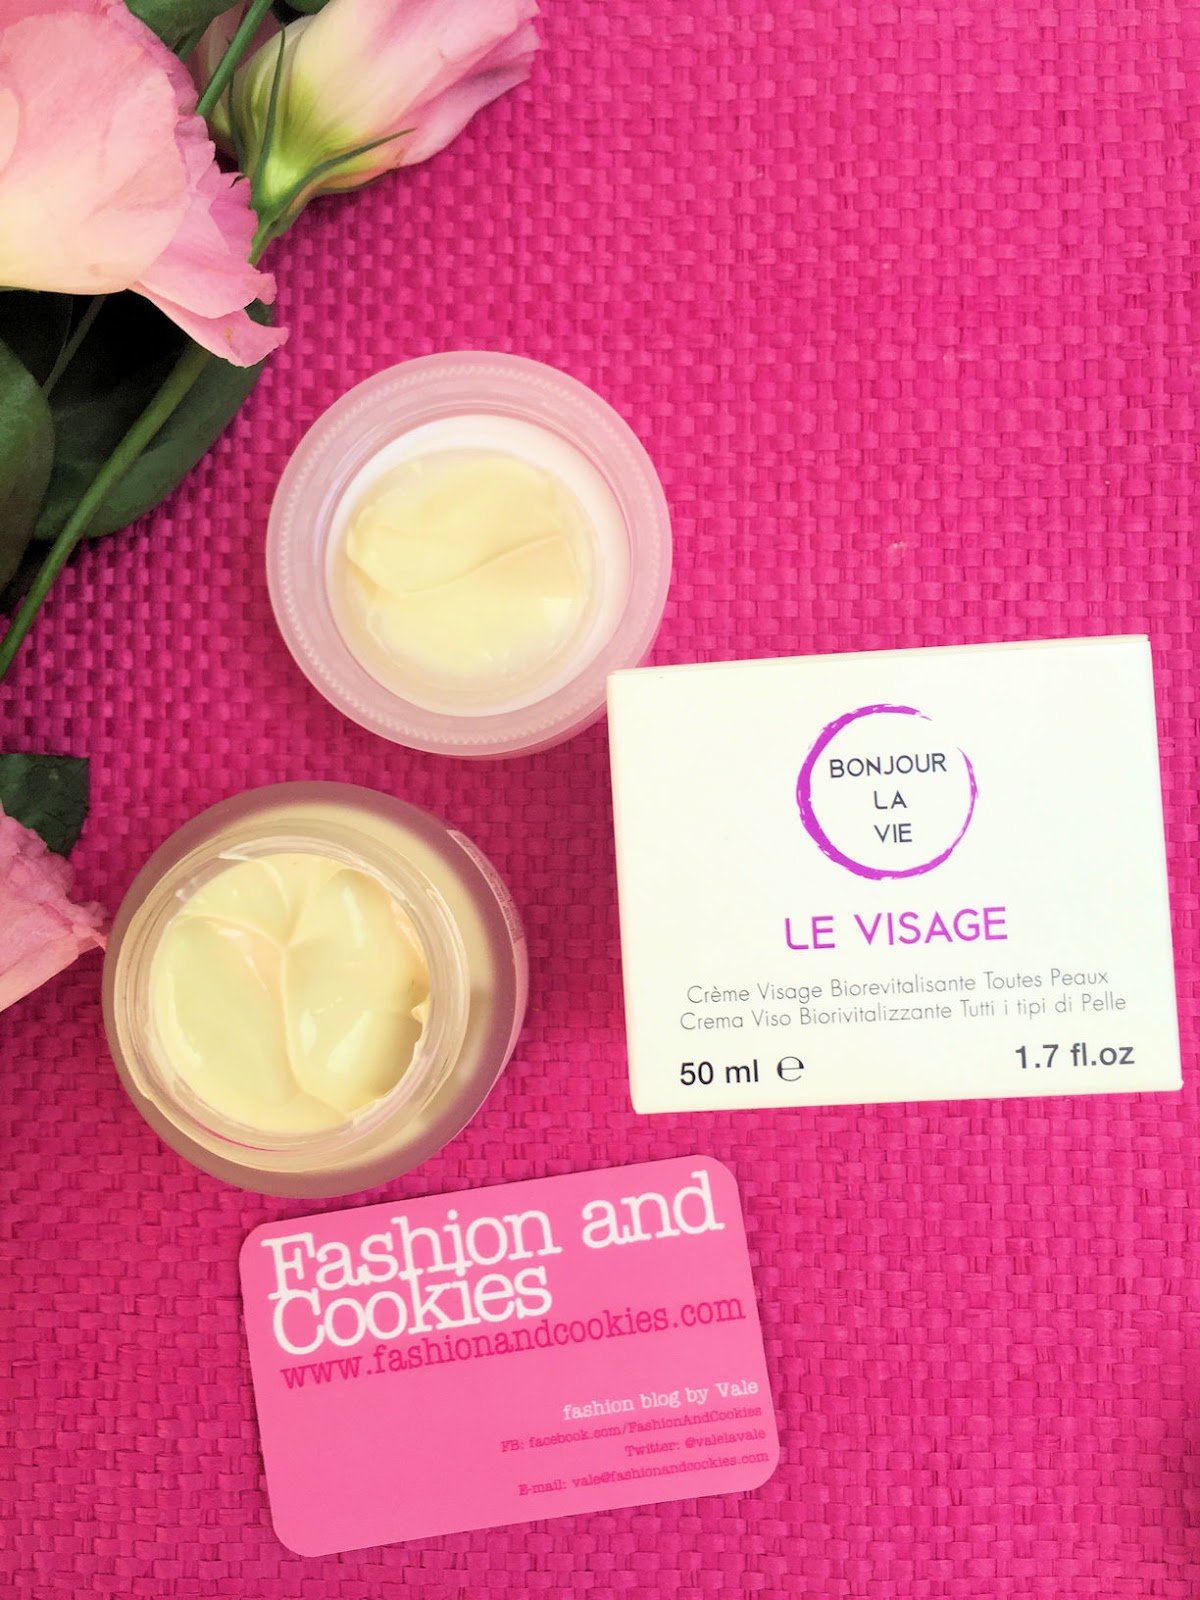 Bonjour La Vie Skincare natural products on Fashion and Cookies beauty blog, beauty blogger